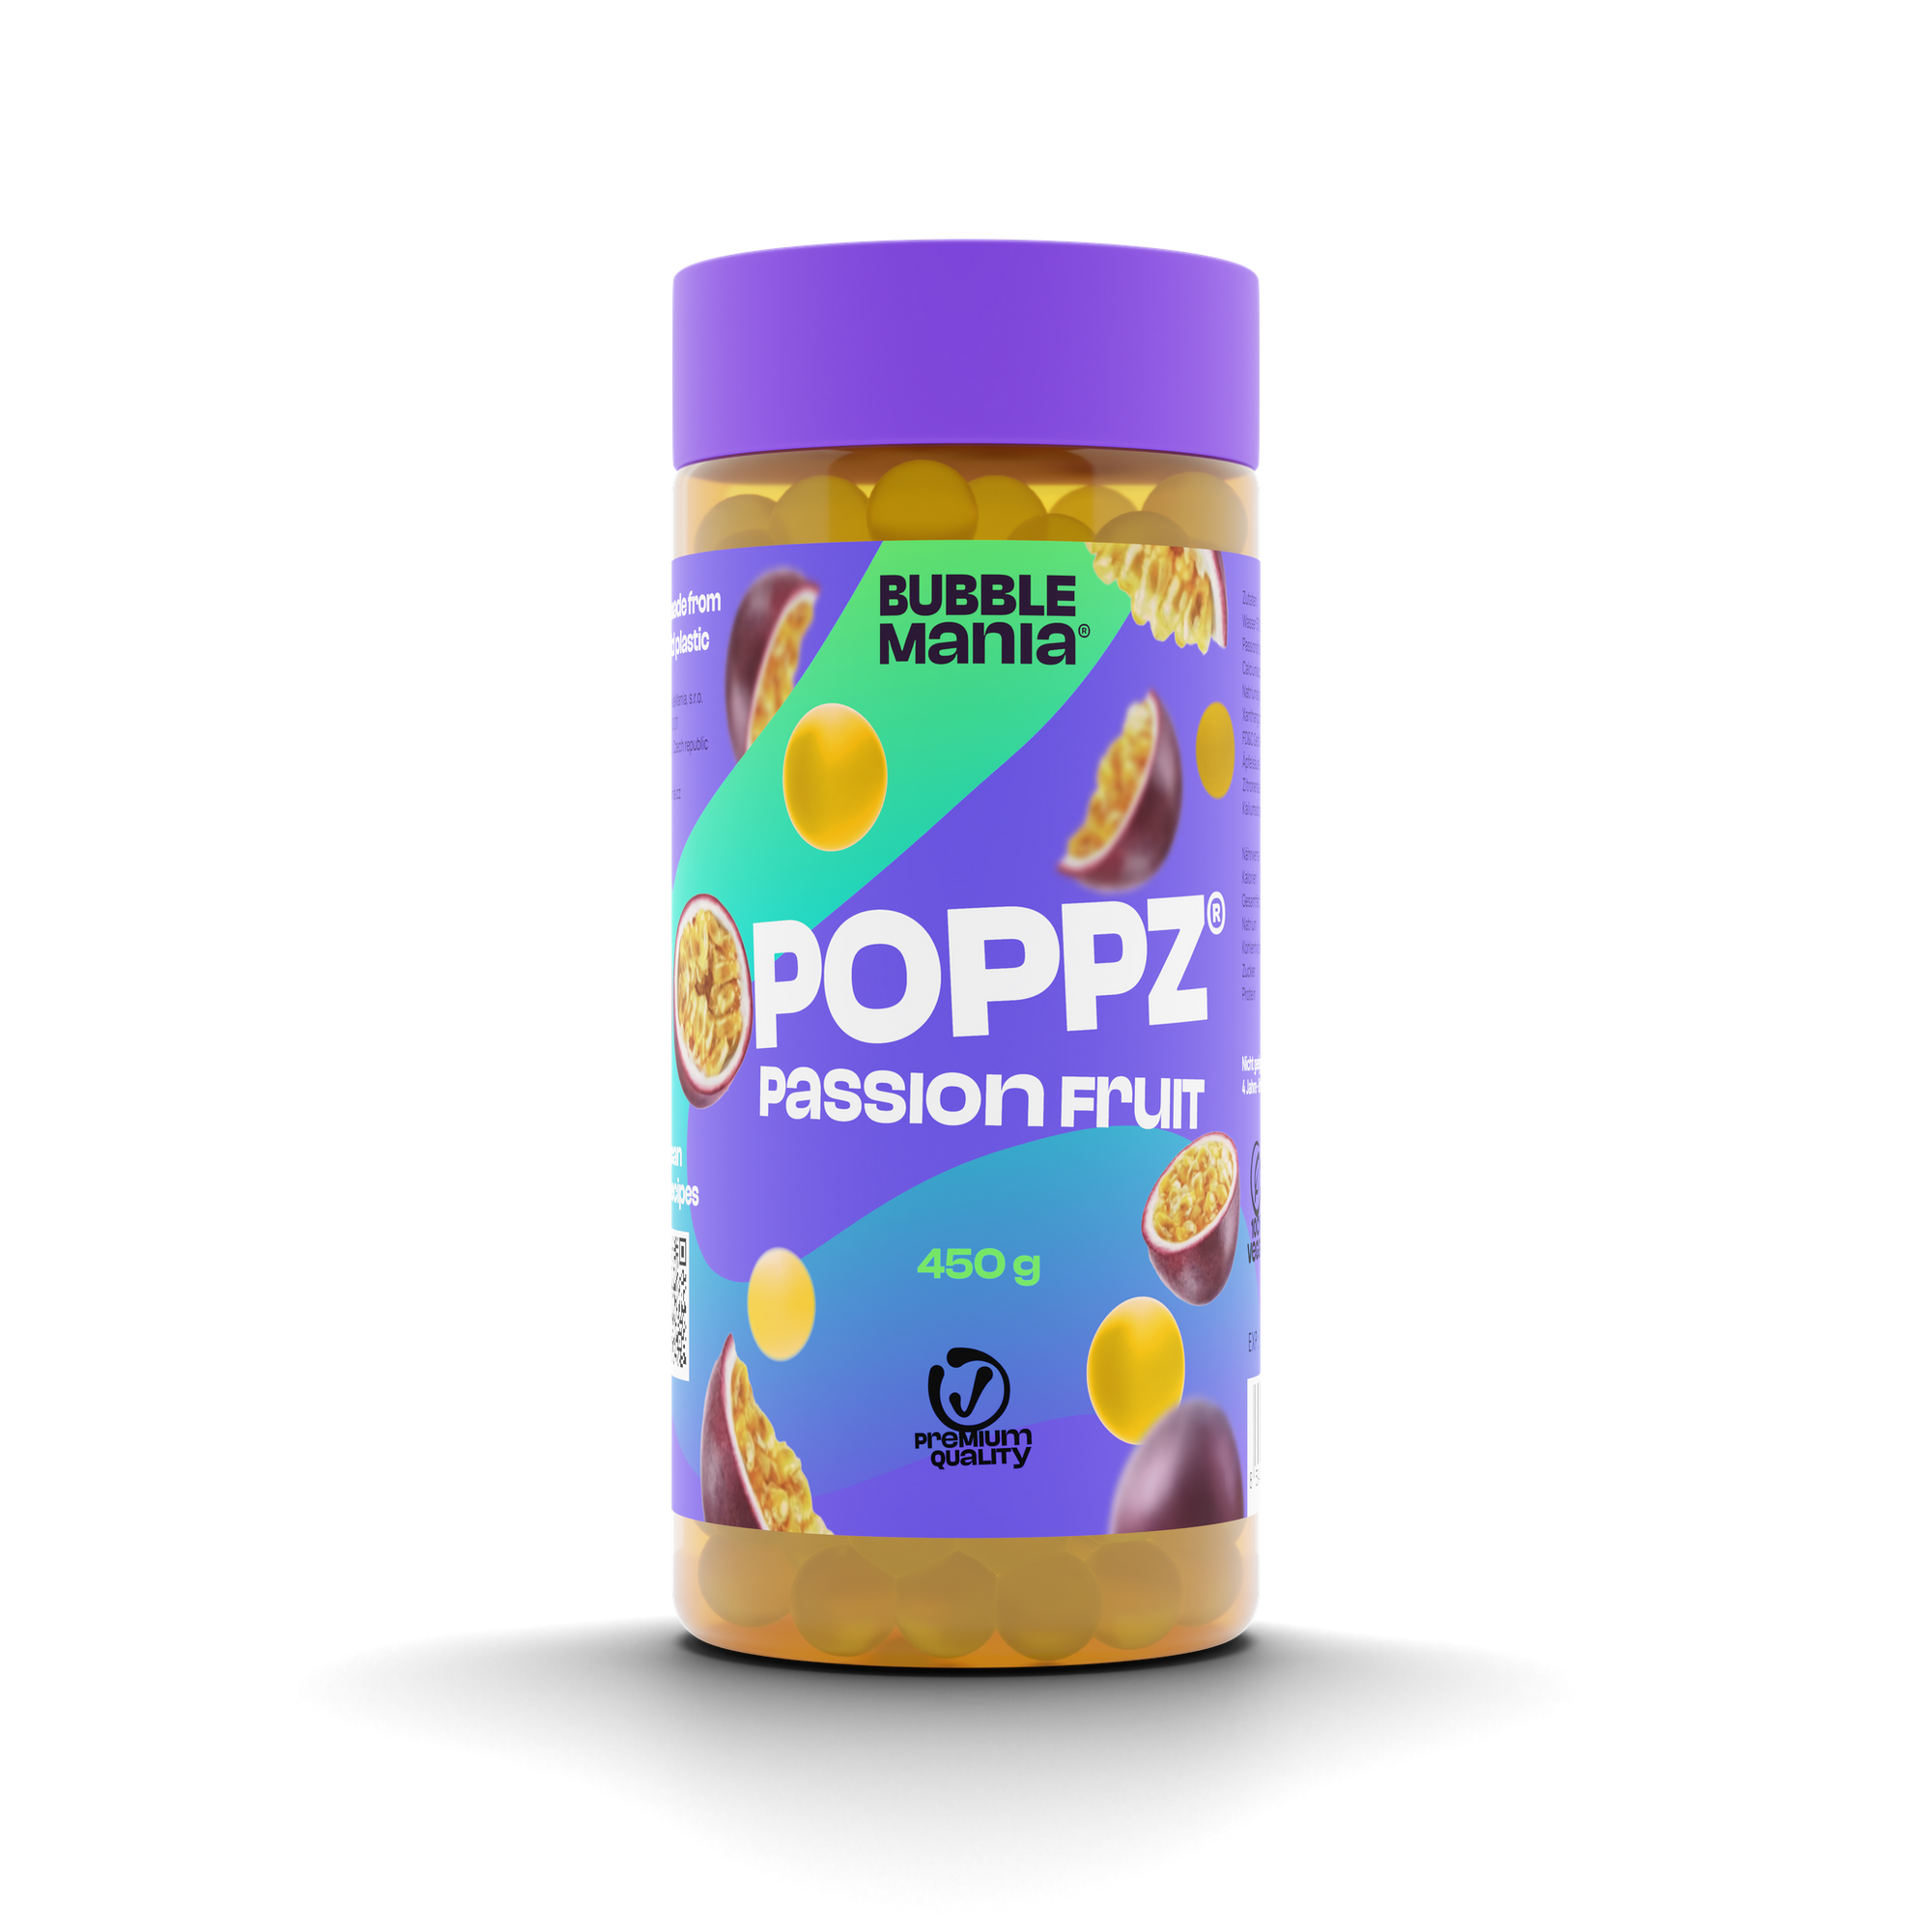 POPPZ Maracuja 450g - BubbleMania's Passionate Passion Fruit Popping Boba